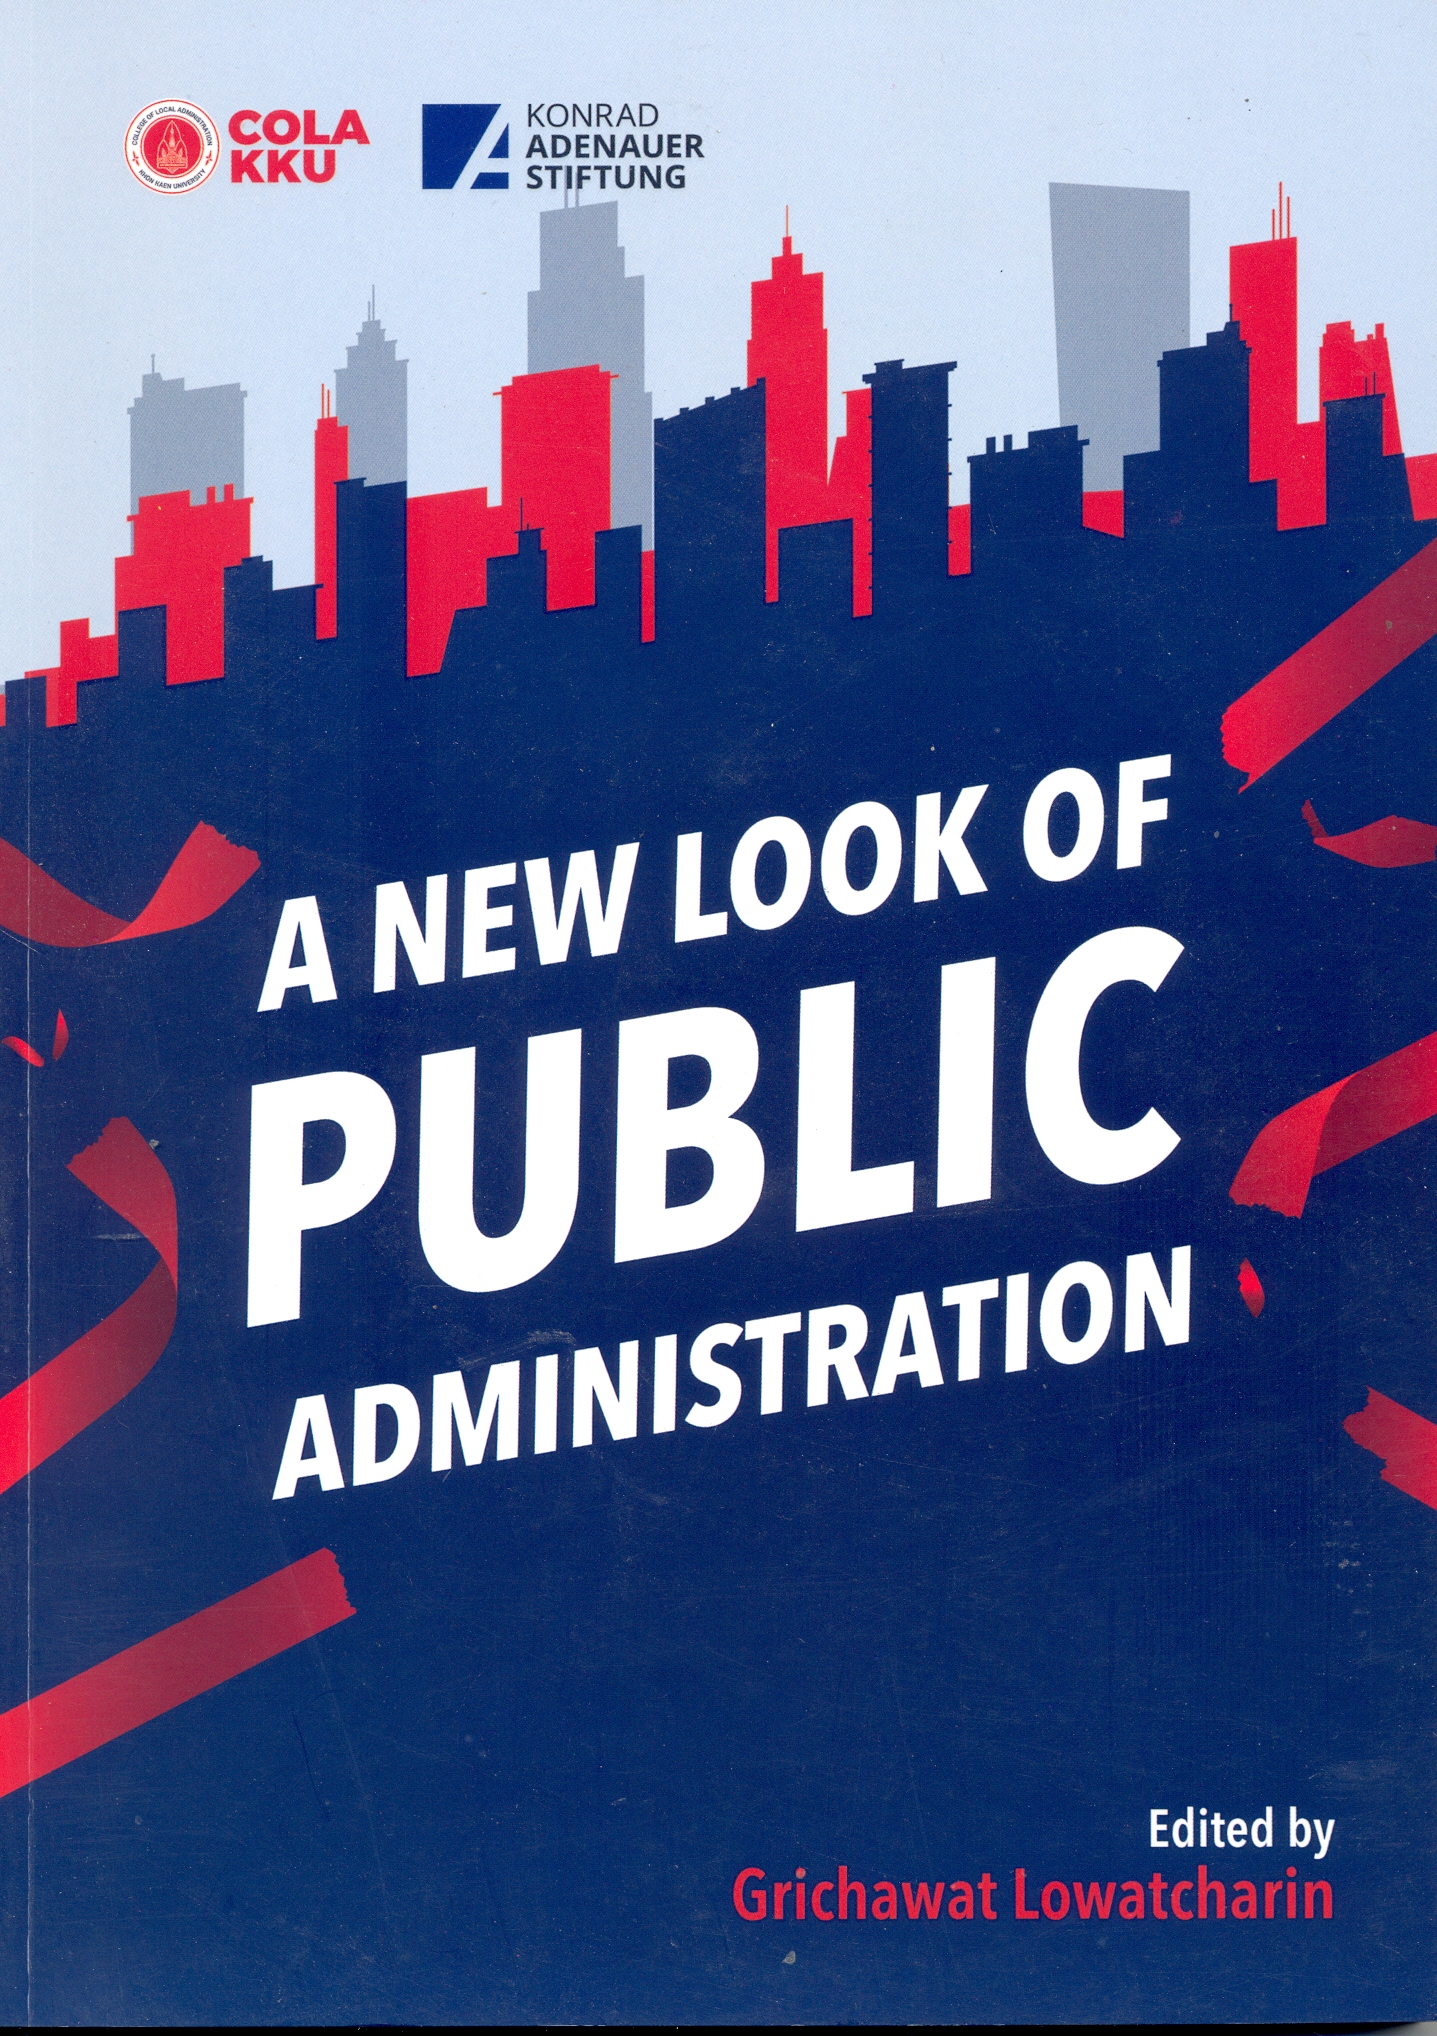 A new look of public administration